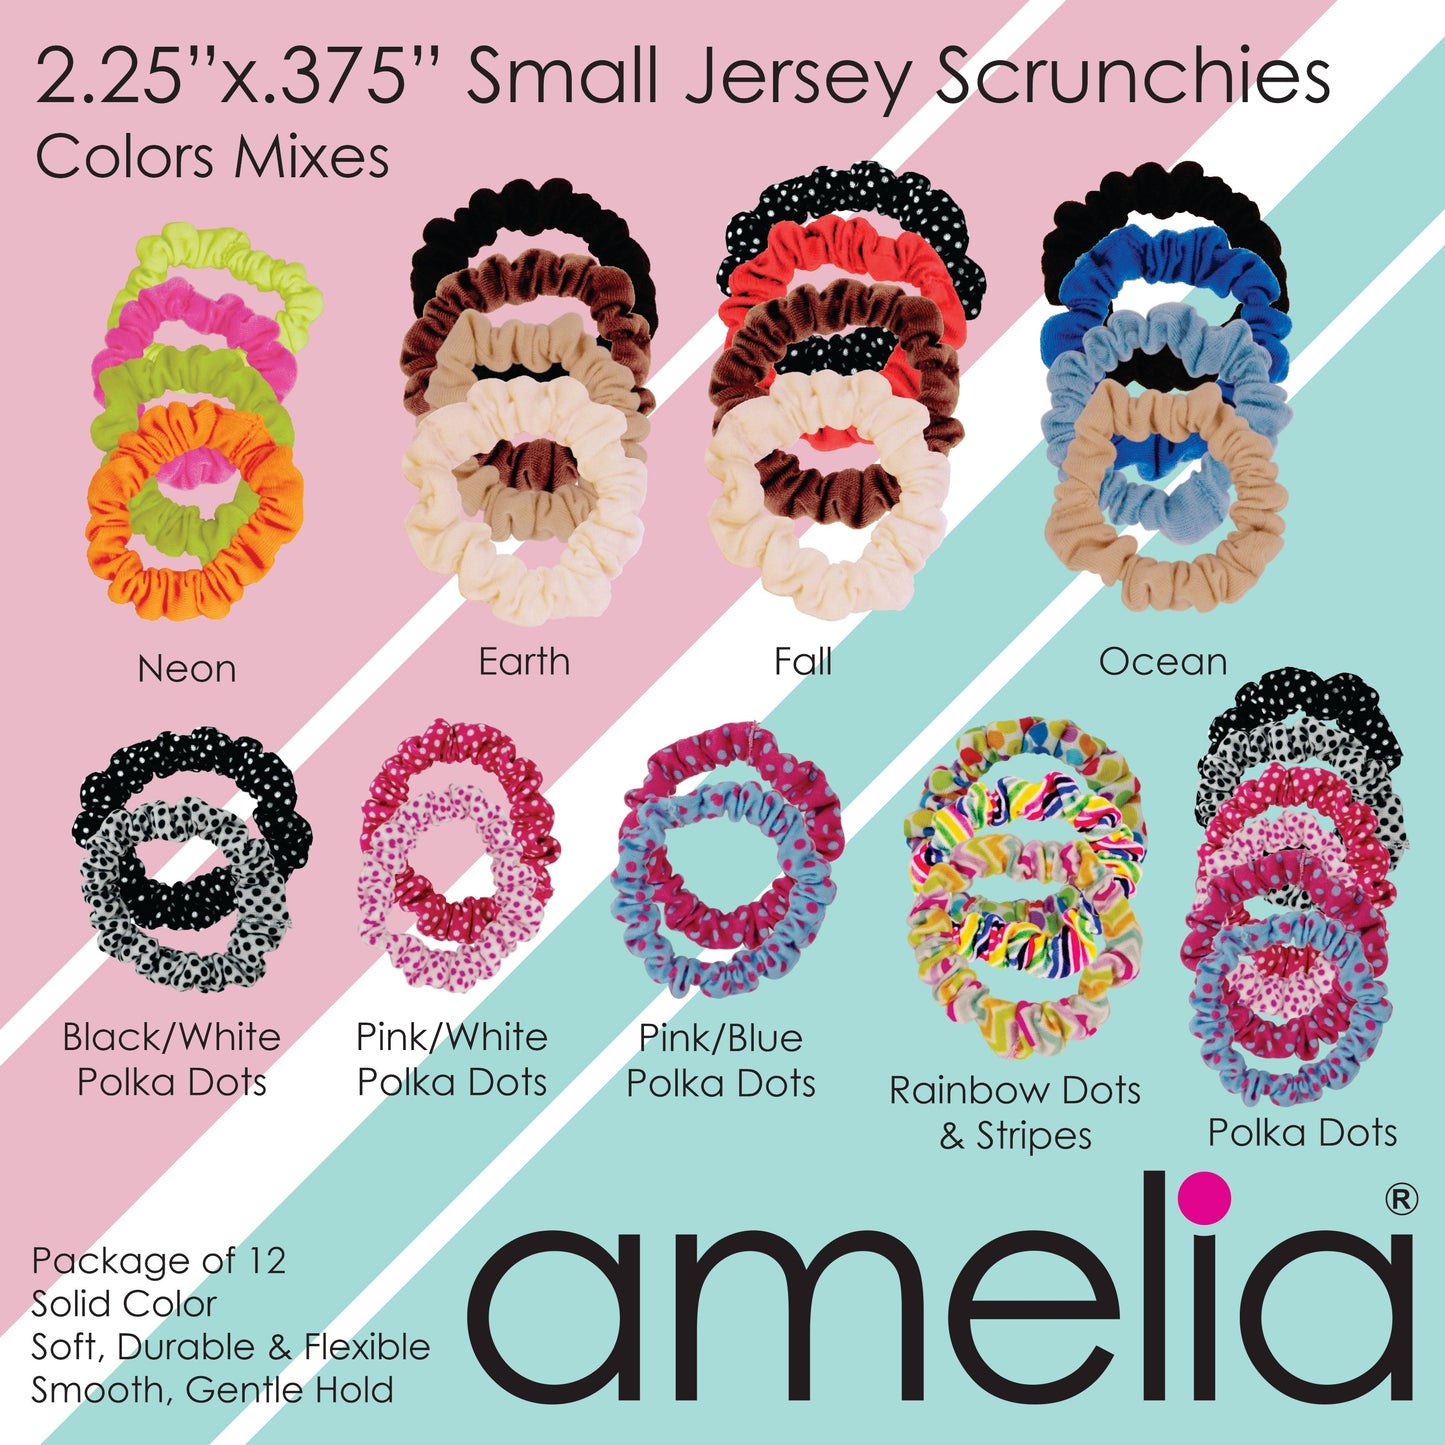 Amelia Beauty, White Jersey Scrunchies, 2.25in Diameter, Gentle on Hair, Strong Hold, No Snag, No Dents or Creases. 12 Pack - 12 Retail Packs